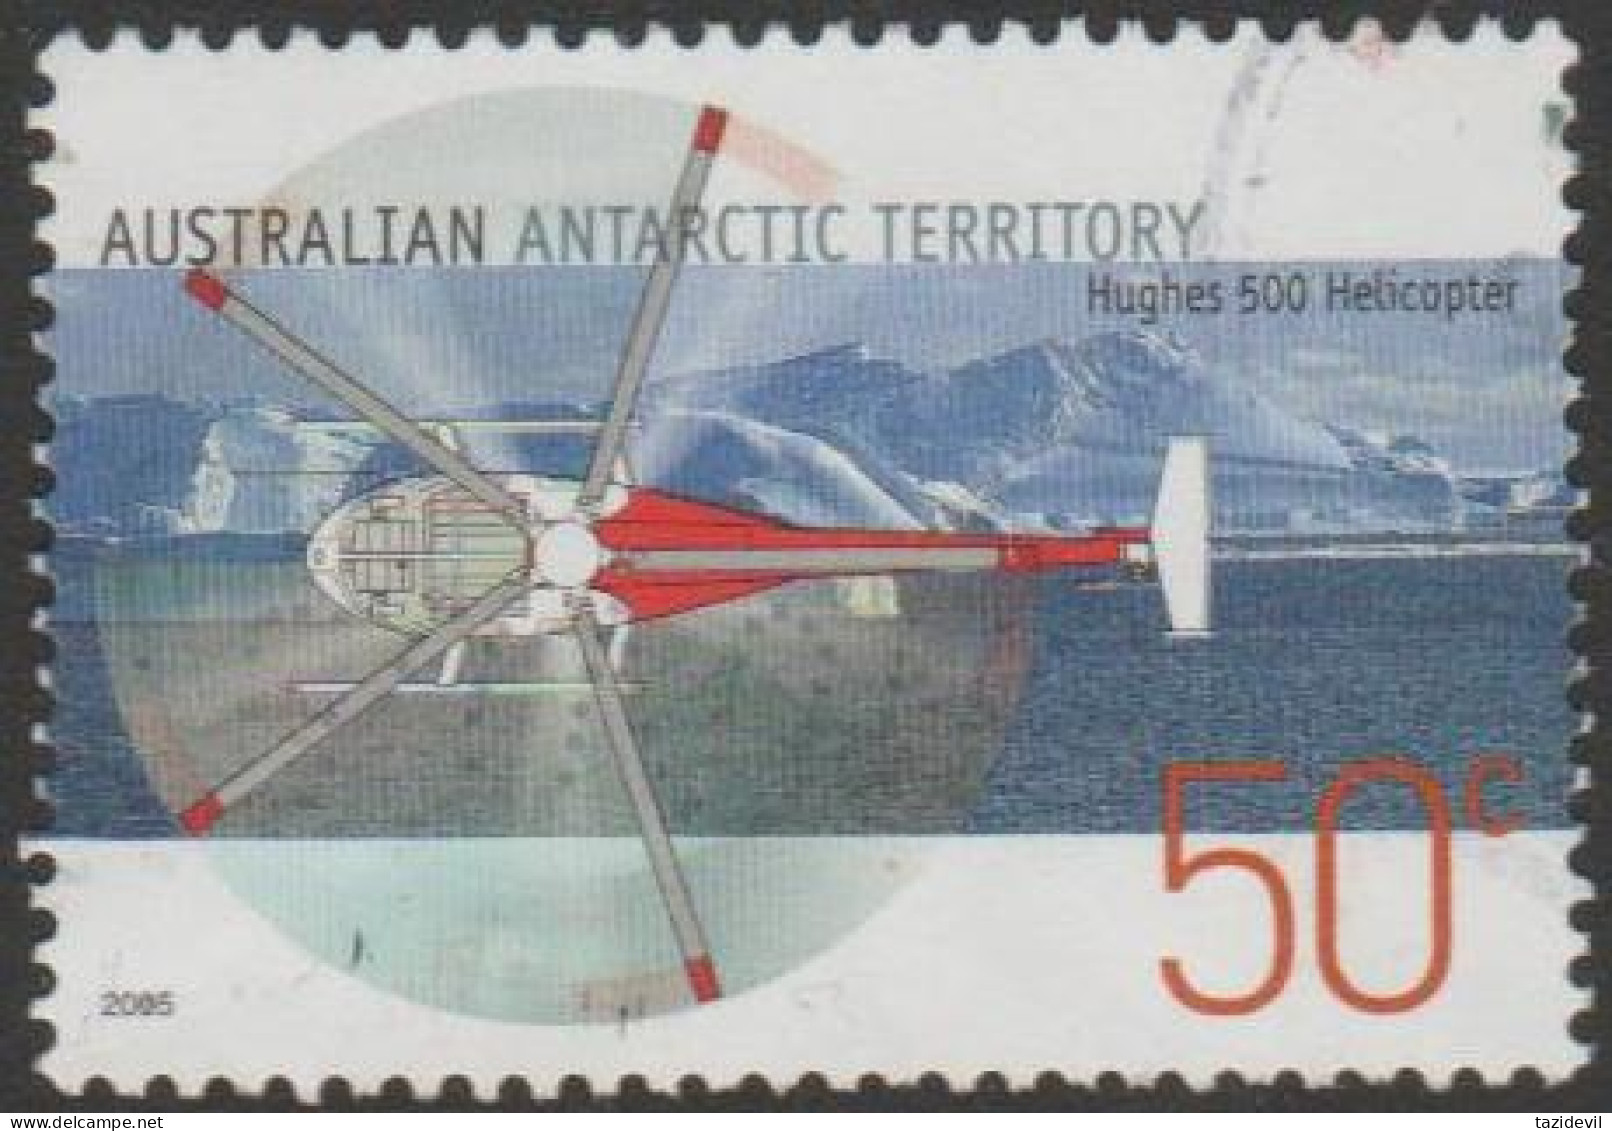 AUSTRALIALIAN ANTARCTIC TERRITORY-USED 2005 50c Aviation In AAT - Helicopter - Gebraucht